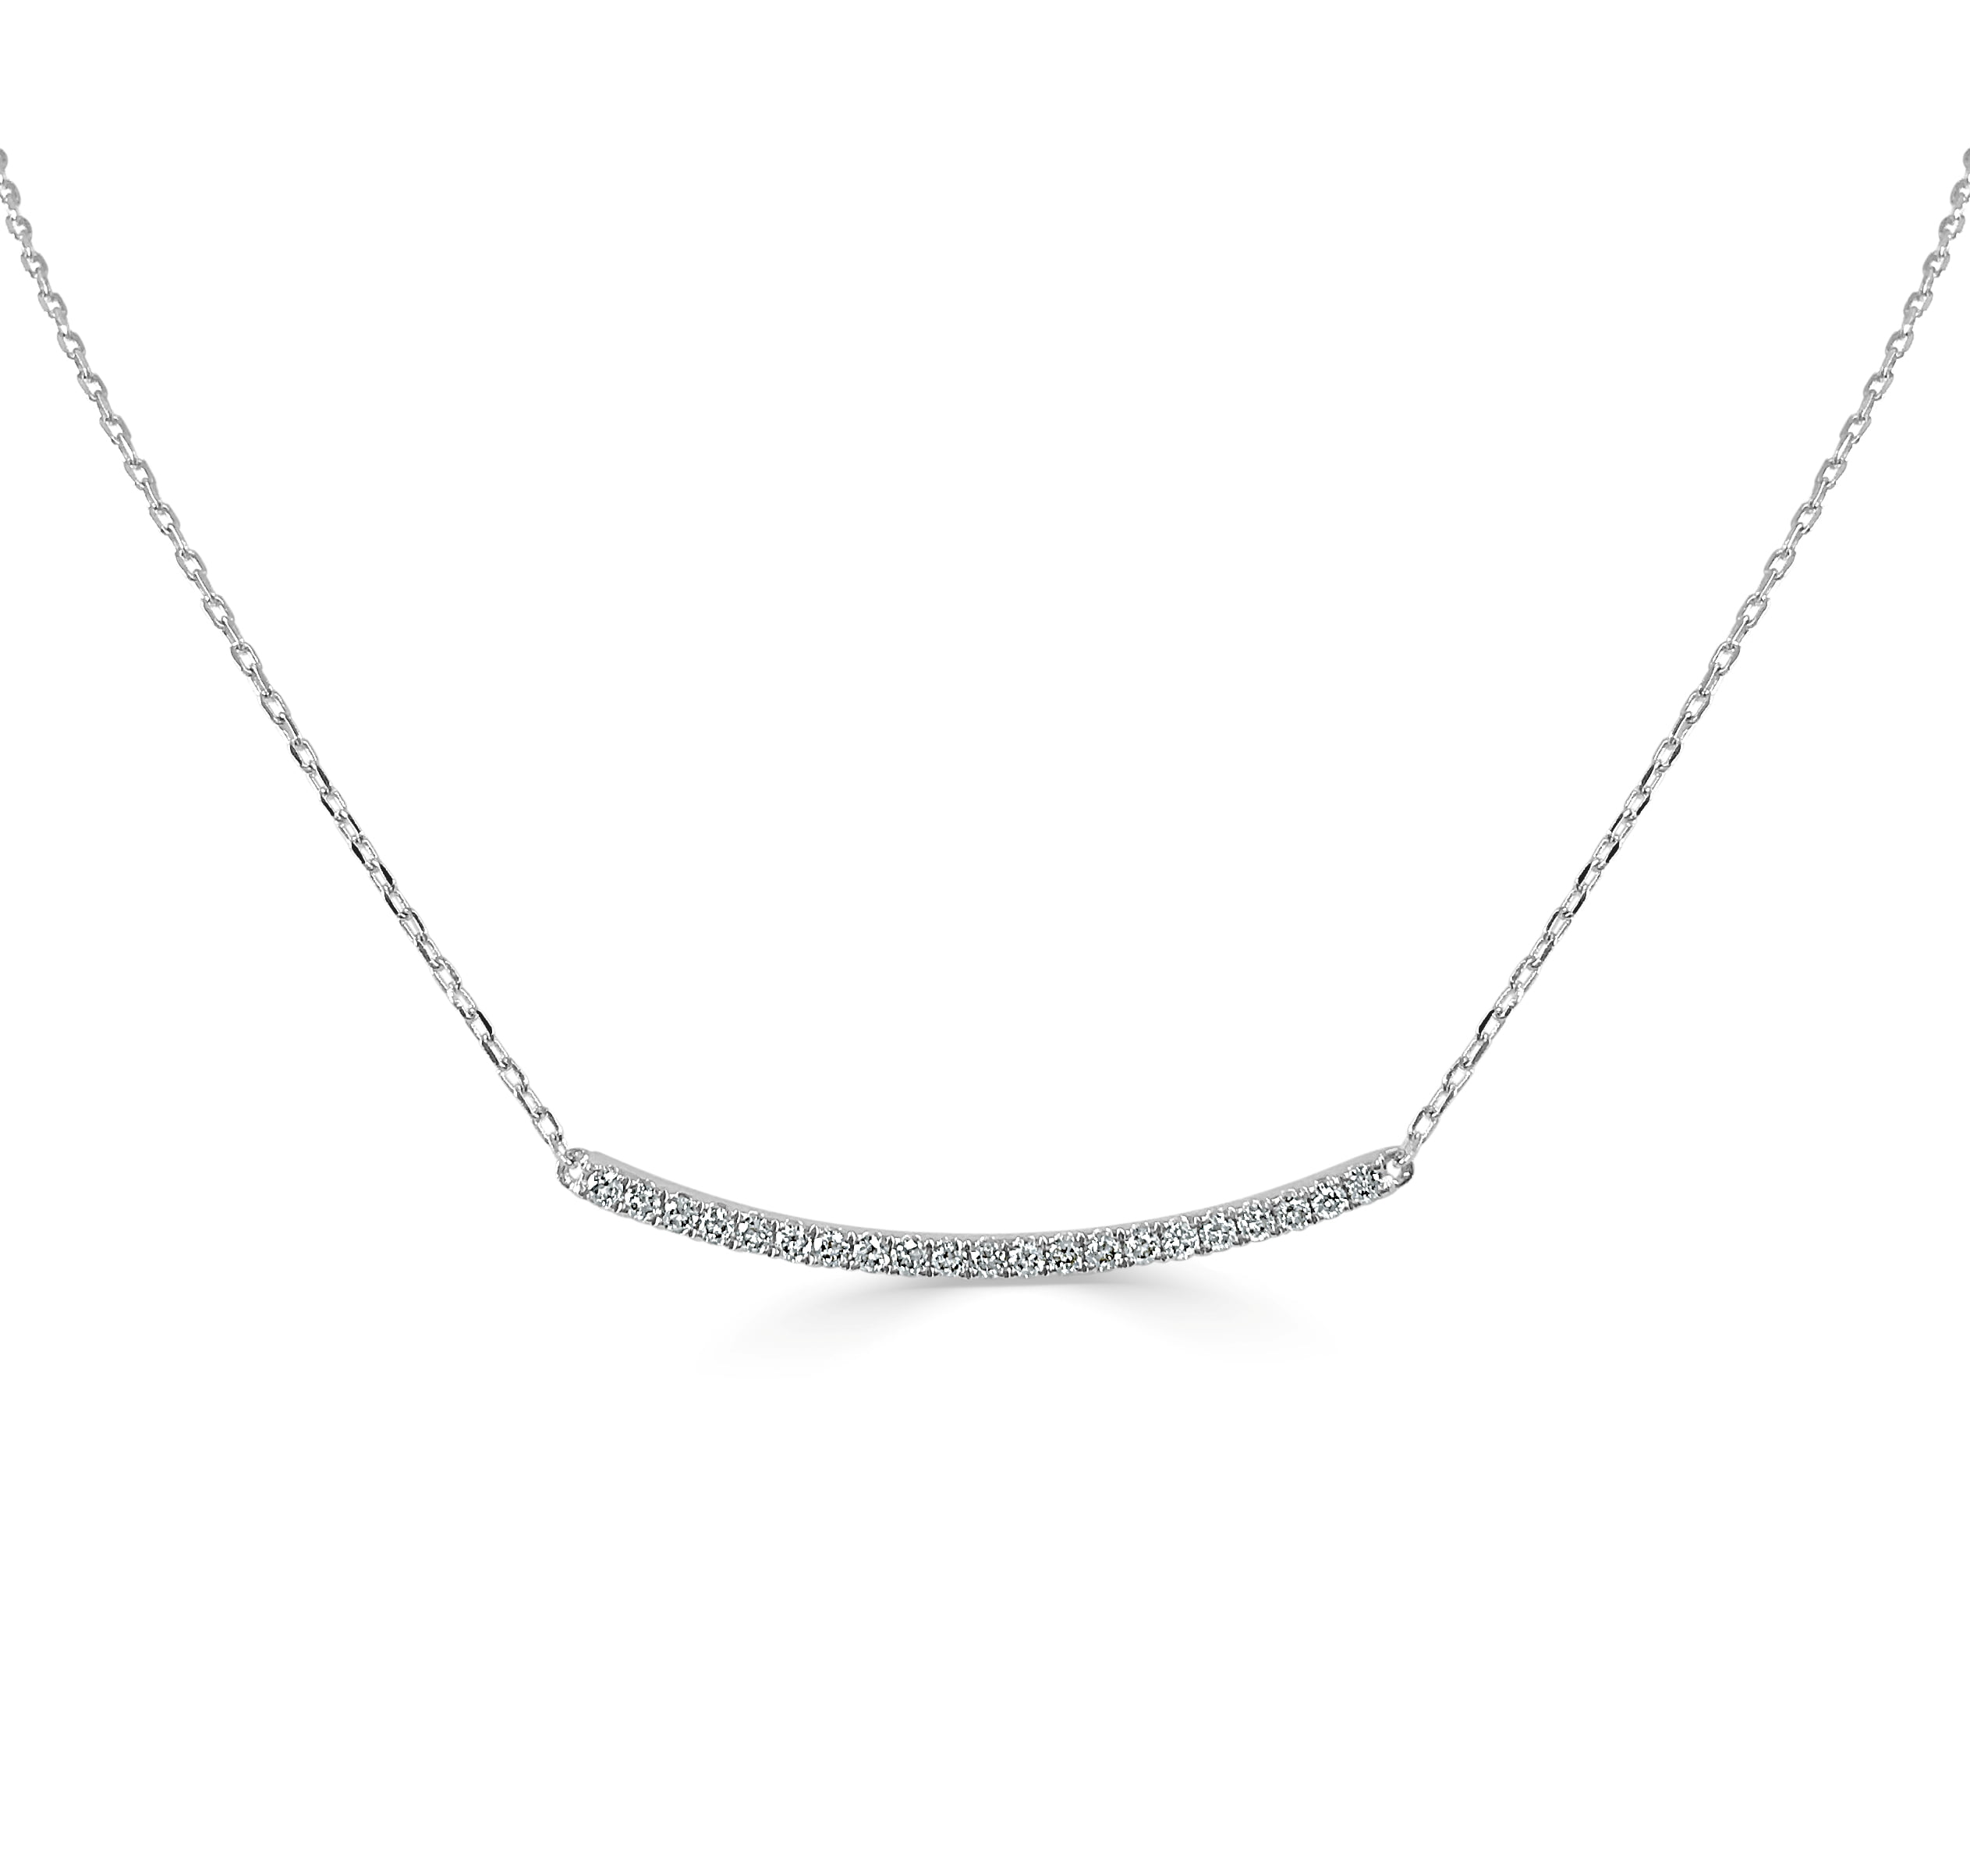 Details about   14k gold small diamond bar necklace 